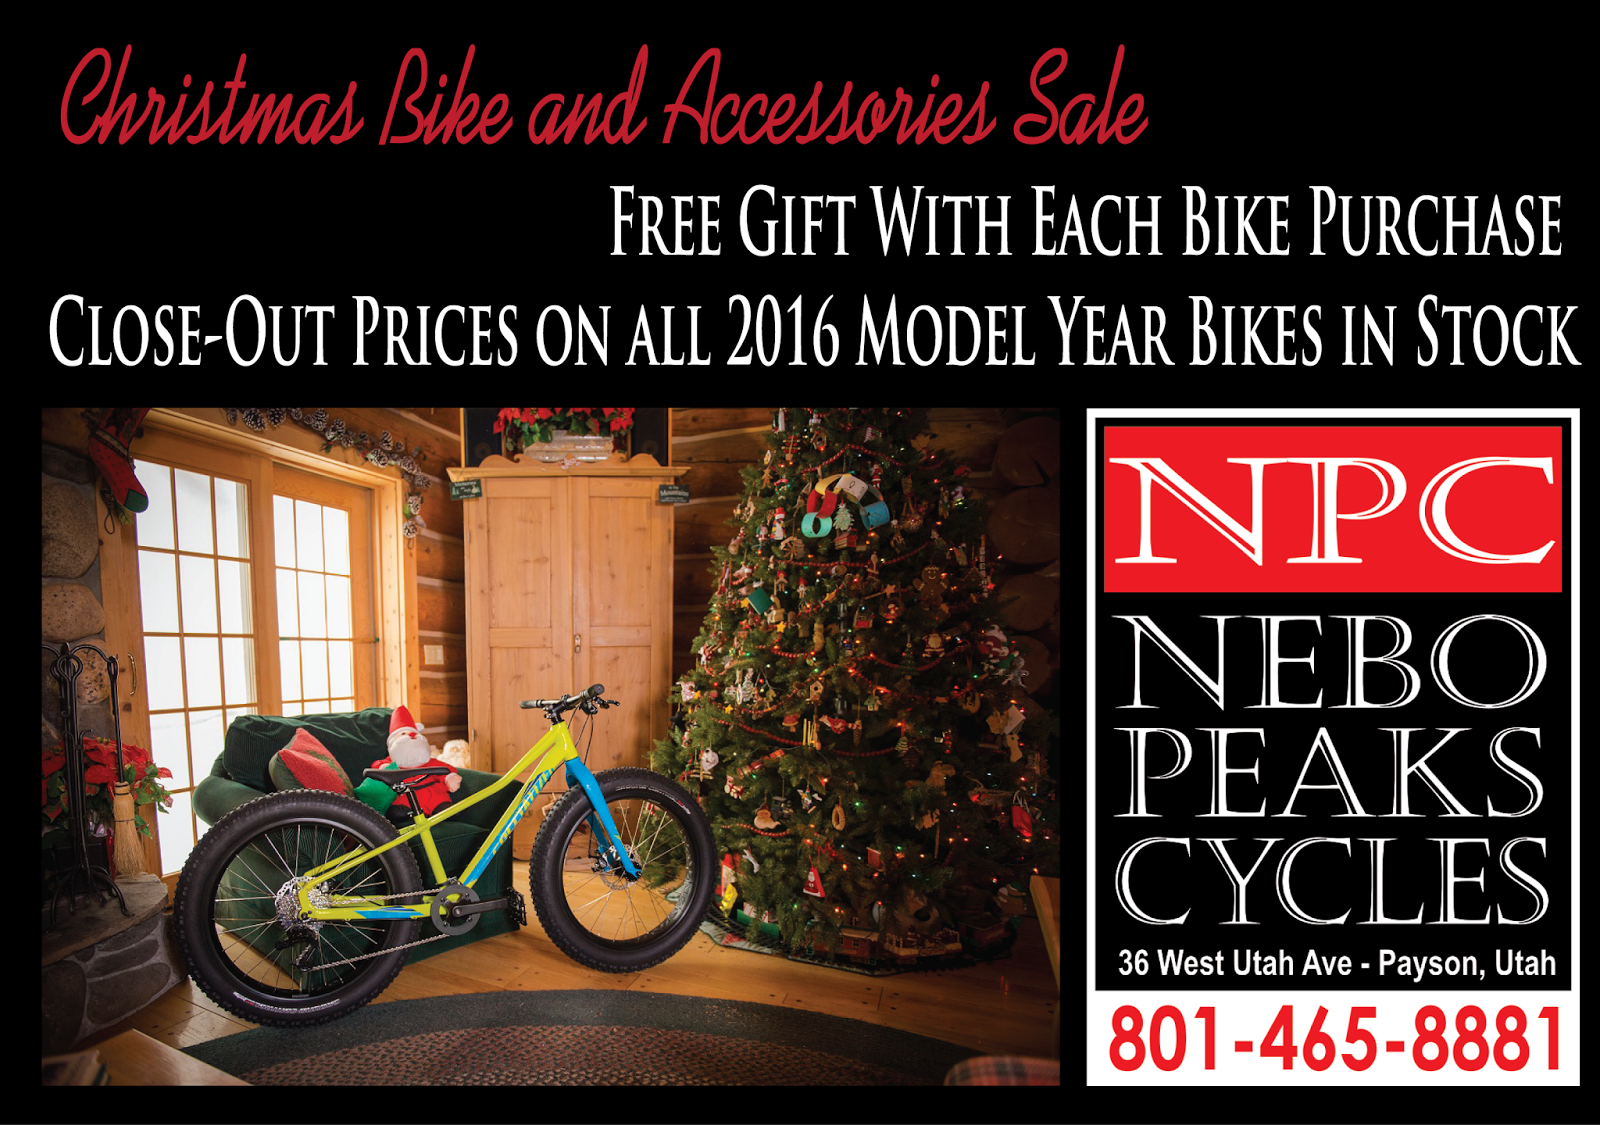 The Payson Chronicle Christmas Bike and Accessories Sale at Nebo Peaks Cycles